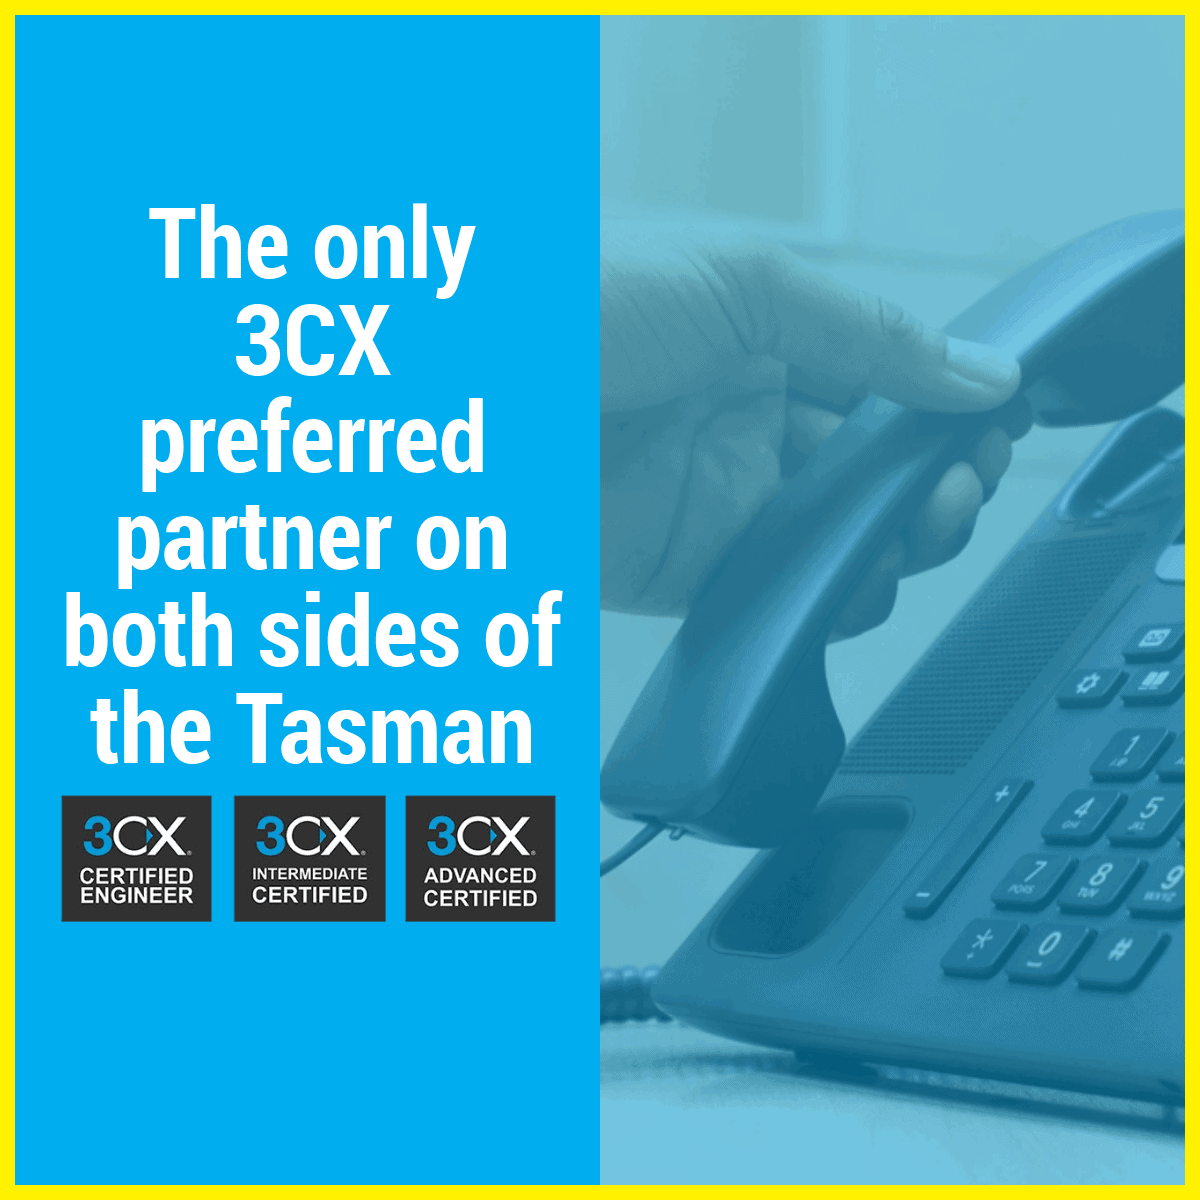 The only 3CX preferred partner on both sides of the Tasman